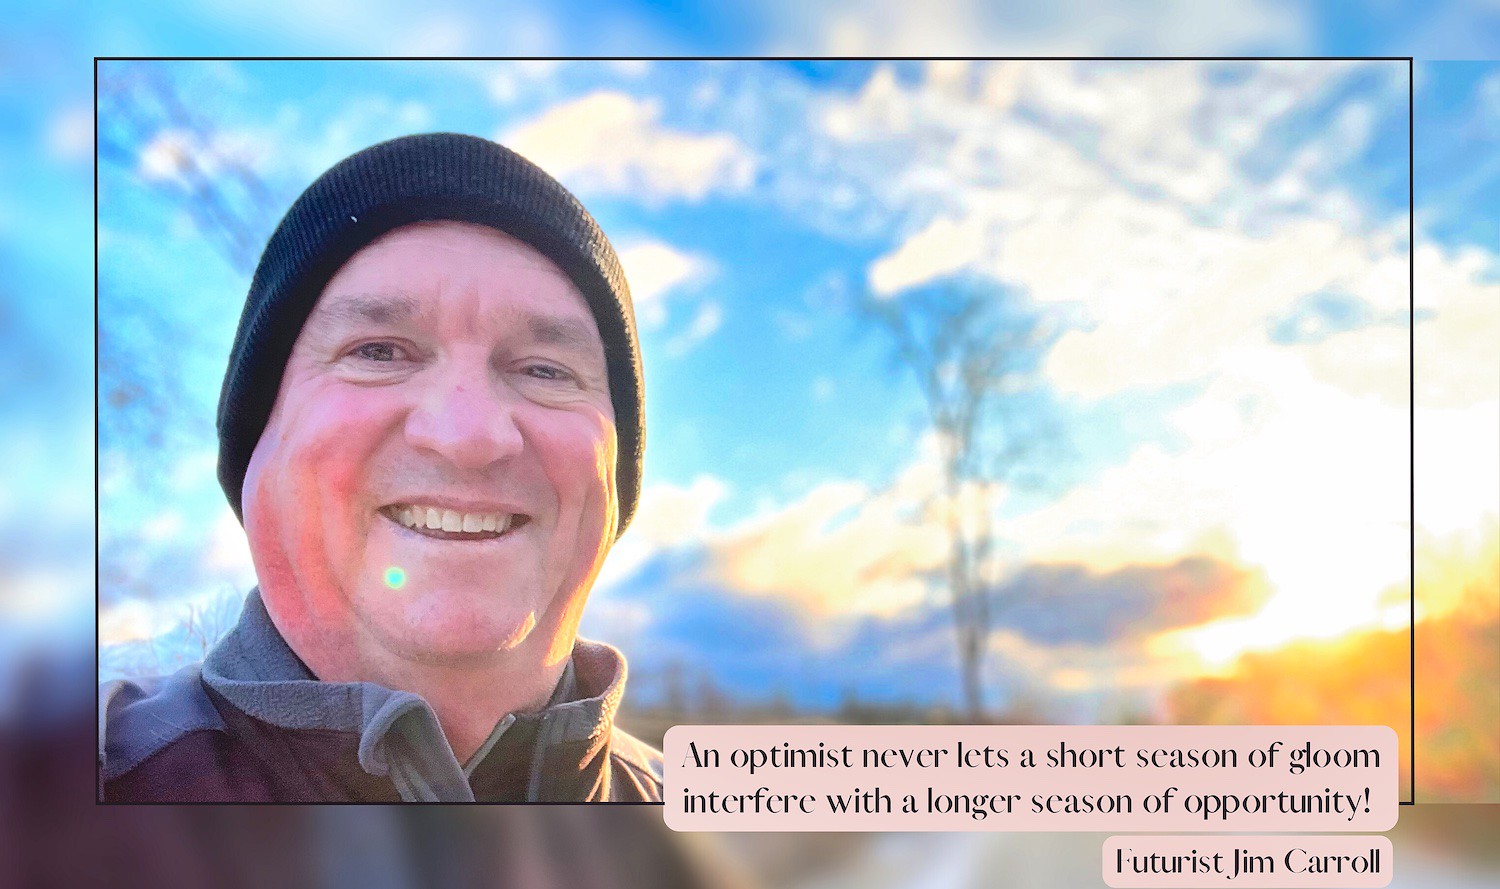 "An optimist never lets a short season of gloom interfere with a longer scason of opportunity!" - Futurist Jim Carroll